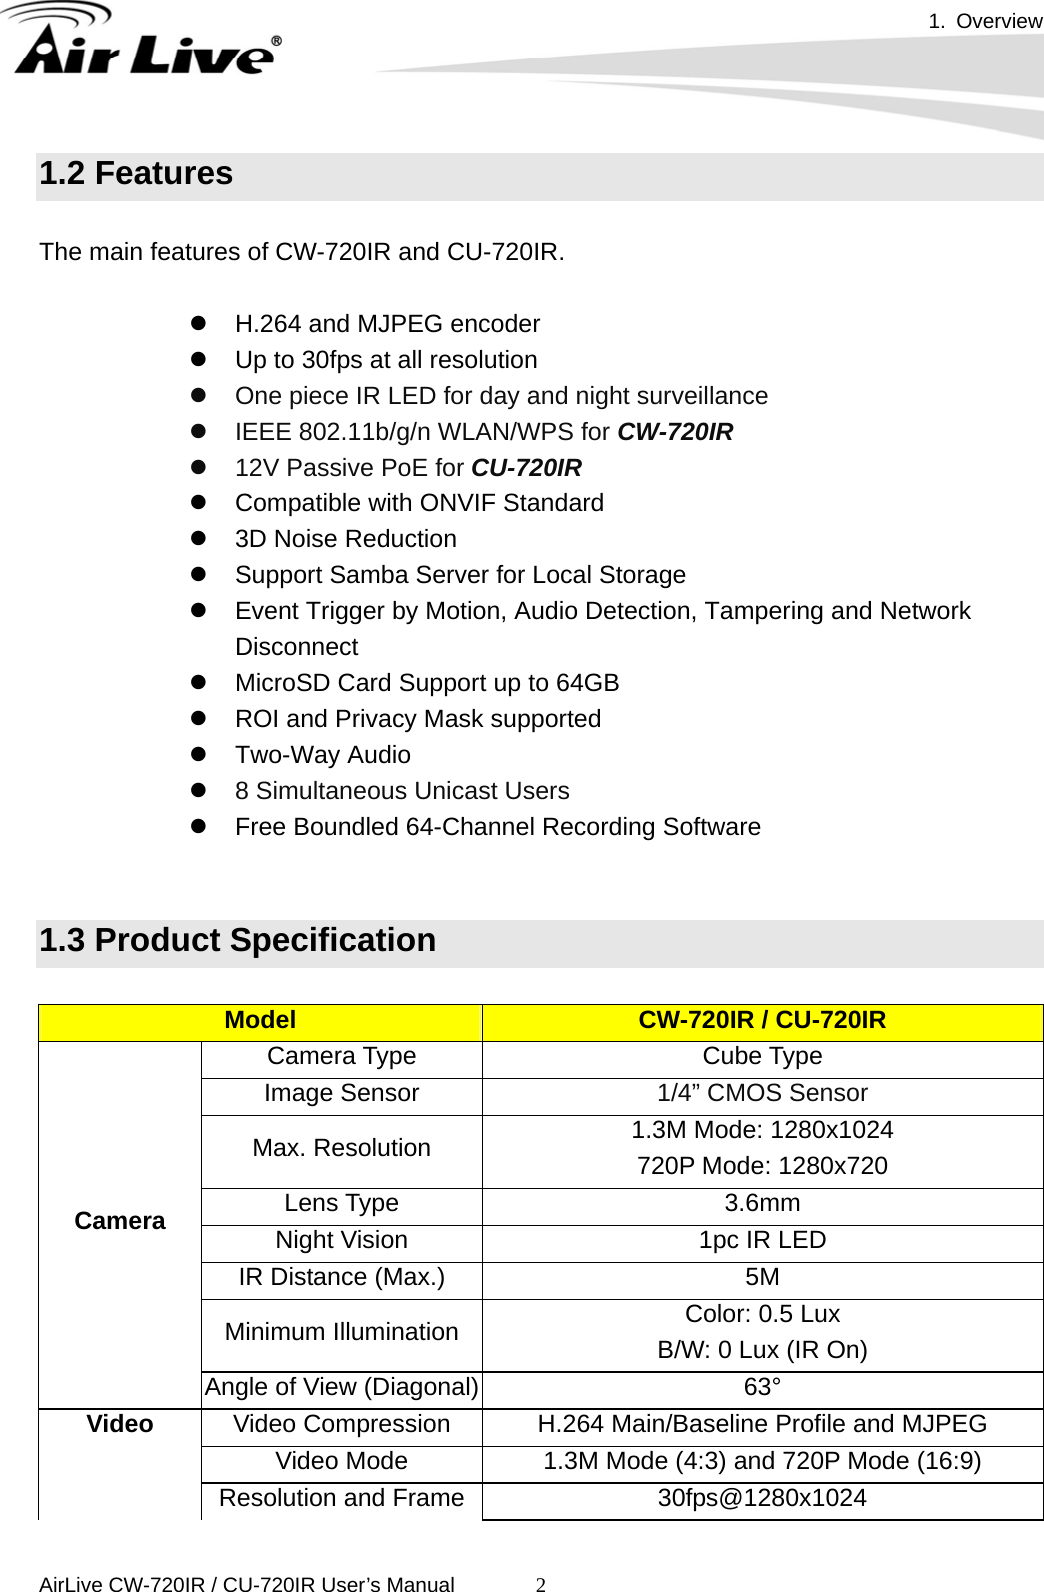 1. Overview      AirLive CW-720IR / CU-720IR User’s Manual 21.2 Features  The main features of CW-720IR and CU-720IR.    H.264 and MJPEG encoder   Up to 30fps at all resolution   One piece IR LED for day and night surveillance   IEEE 802.11b/g/n WLAN/WPS for CW-720IR   12V Passive PoE for CU-720IR   Compatible with ONVIF Standard   3D Noise Reduction   Support Samba Server for Local Storage   Event Trigger by Motion, Audio Detection, Tampering and Network Disconnect   MicroSD Card Support up to 64GB   ROI and Privacy Mask supported  Two-Way Audio  8 Simultaneous Unicast Users   Free Boundled 64-Channel Recording Software   1.3 Product Specification  Model   CW-720IR / CU-720IR Camera Type  Cube Type Image Sensor  1/4” CMOS Sensor Max. Resolution  1.3M Mode: 1280x1024 720P Mode: 1280x720 Lens Type  3.6mm Night Vision  1pc IR LED IR Distance (Max.)  5M Minimum Illumination  Color: 0.5 Lux B/W: 0 Lux (IR On) Camera Angle of View (Diagonal) 63° Video Compression  H.264 Main/Baseline Profile and MJPEG Video Mode  1.3M Mode (4:3) and 720P Mode (16:9) Video Resolution and Frame  30fps@1280x1024 